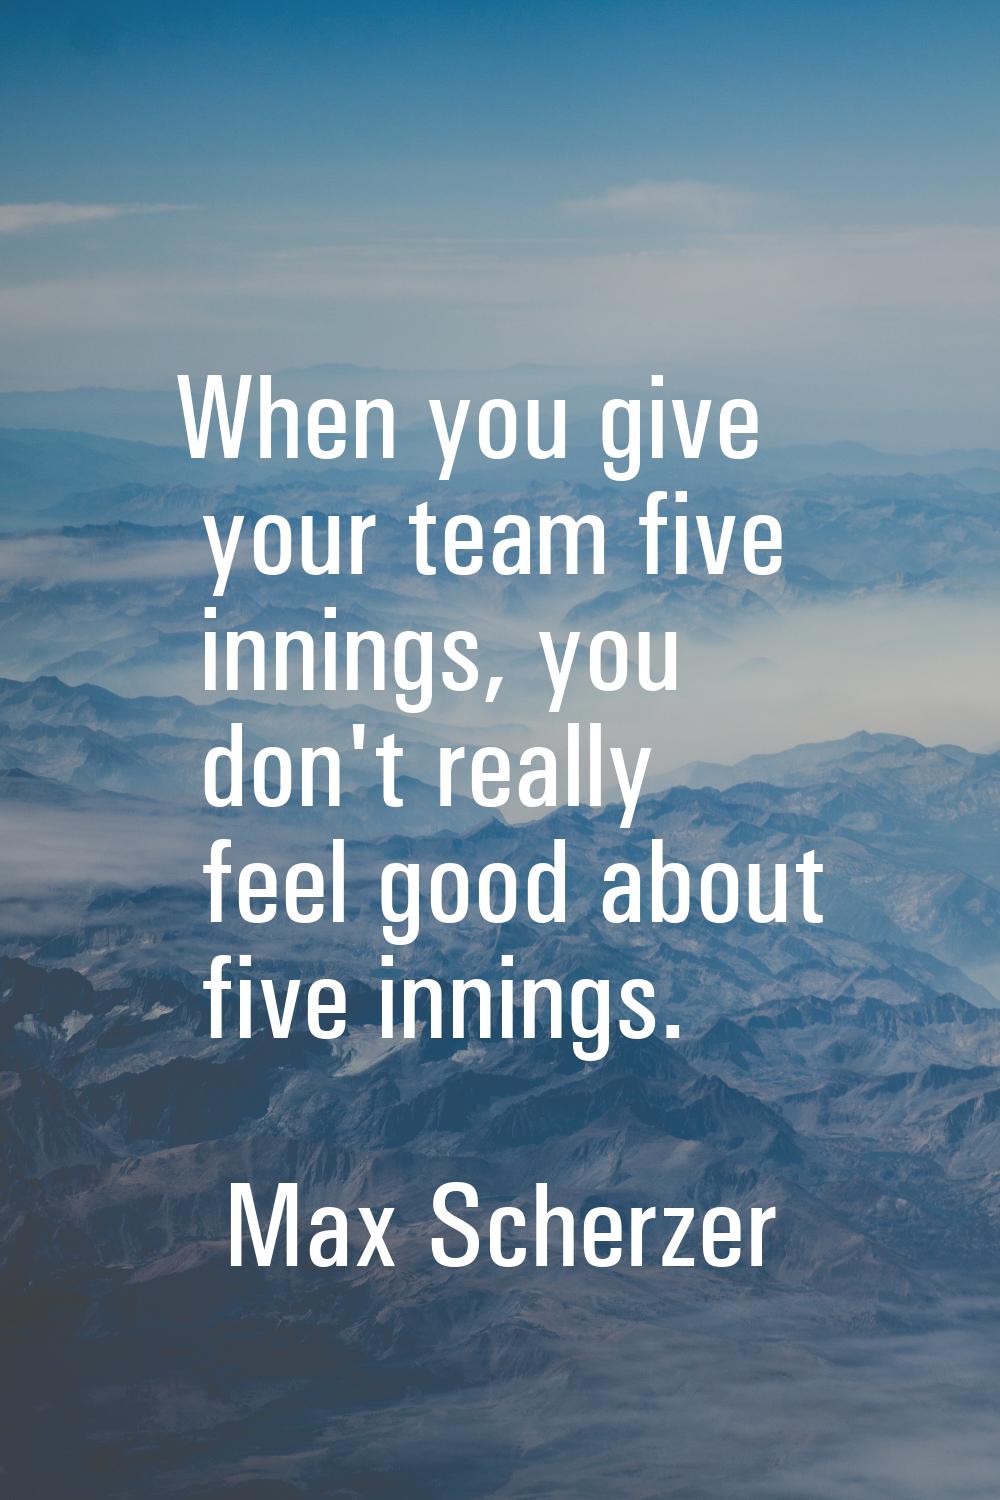 When you give your team five innings, you don't really feel good about five innings.